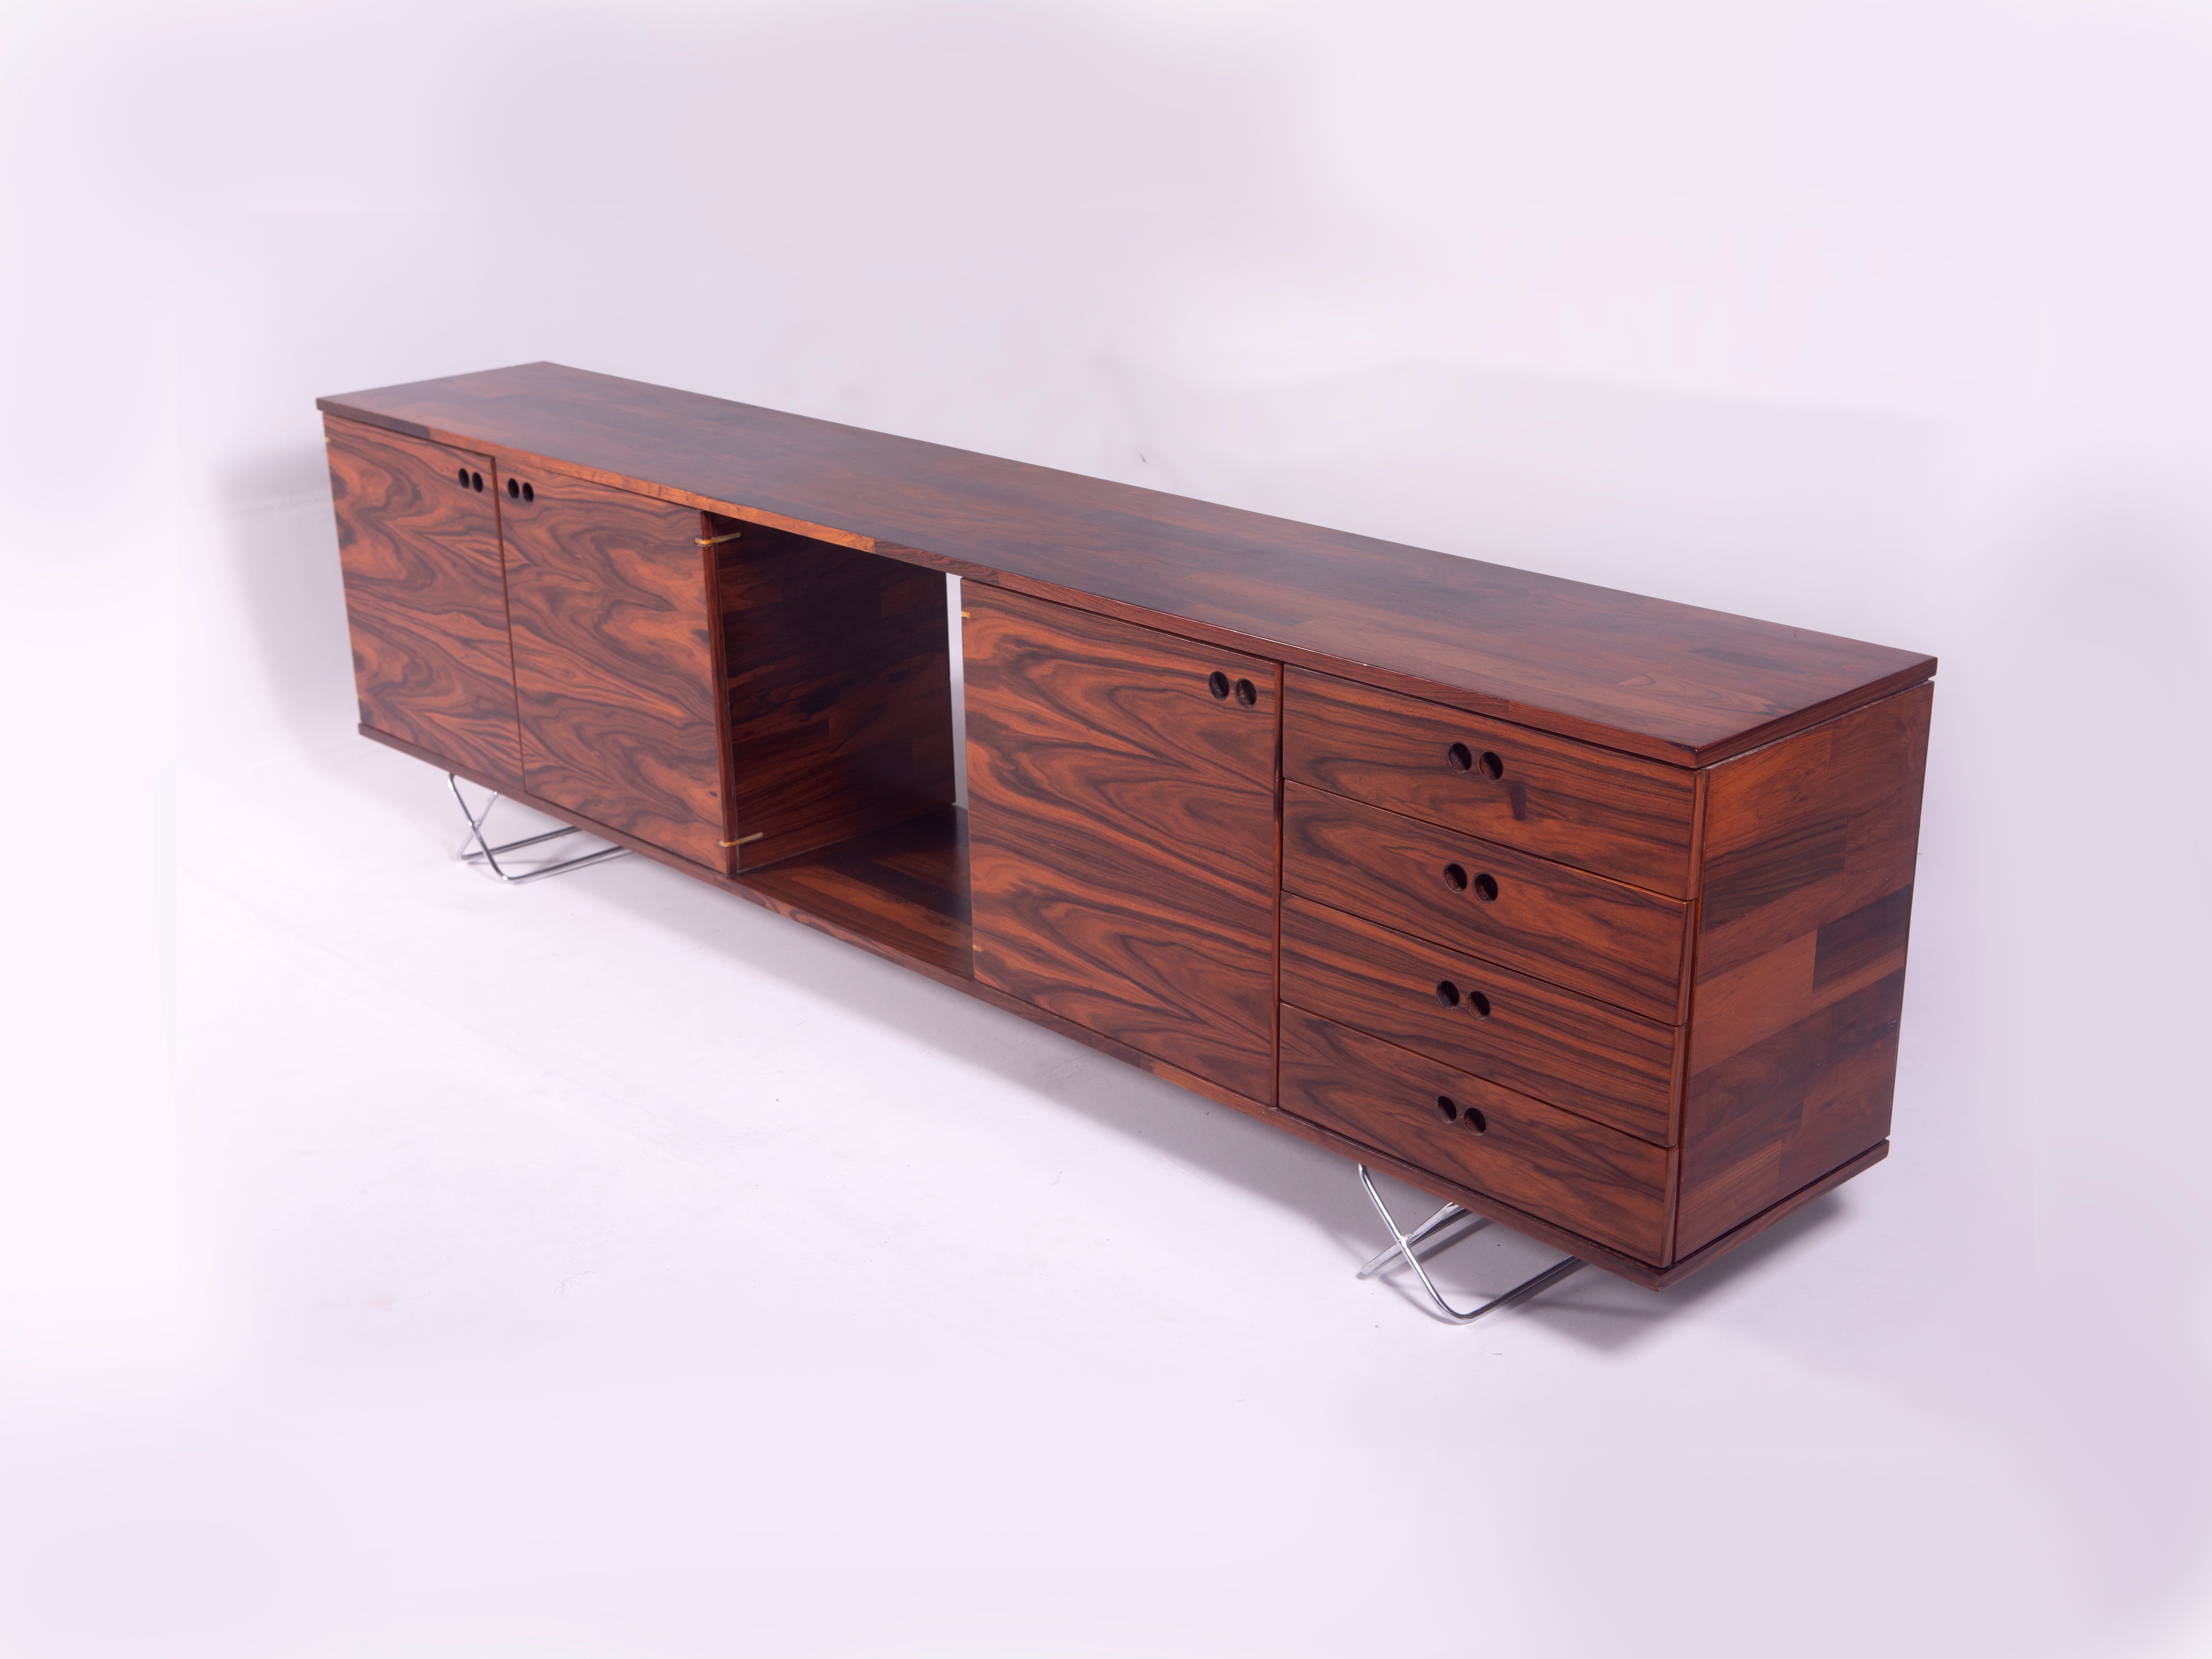 Mid-Century Modern Buffet by Jorge Zalszupin, Brazil, 1960s

Fashioned by the talented Polish-Brazilian architect and designer, Jorge Zalszupin, this solid wood buffet with X-shaped metal feet is a harmonious fusion of artistry and functionality.